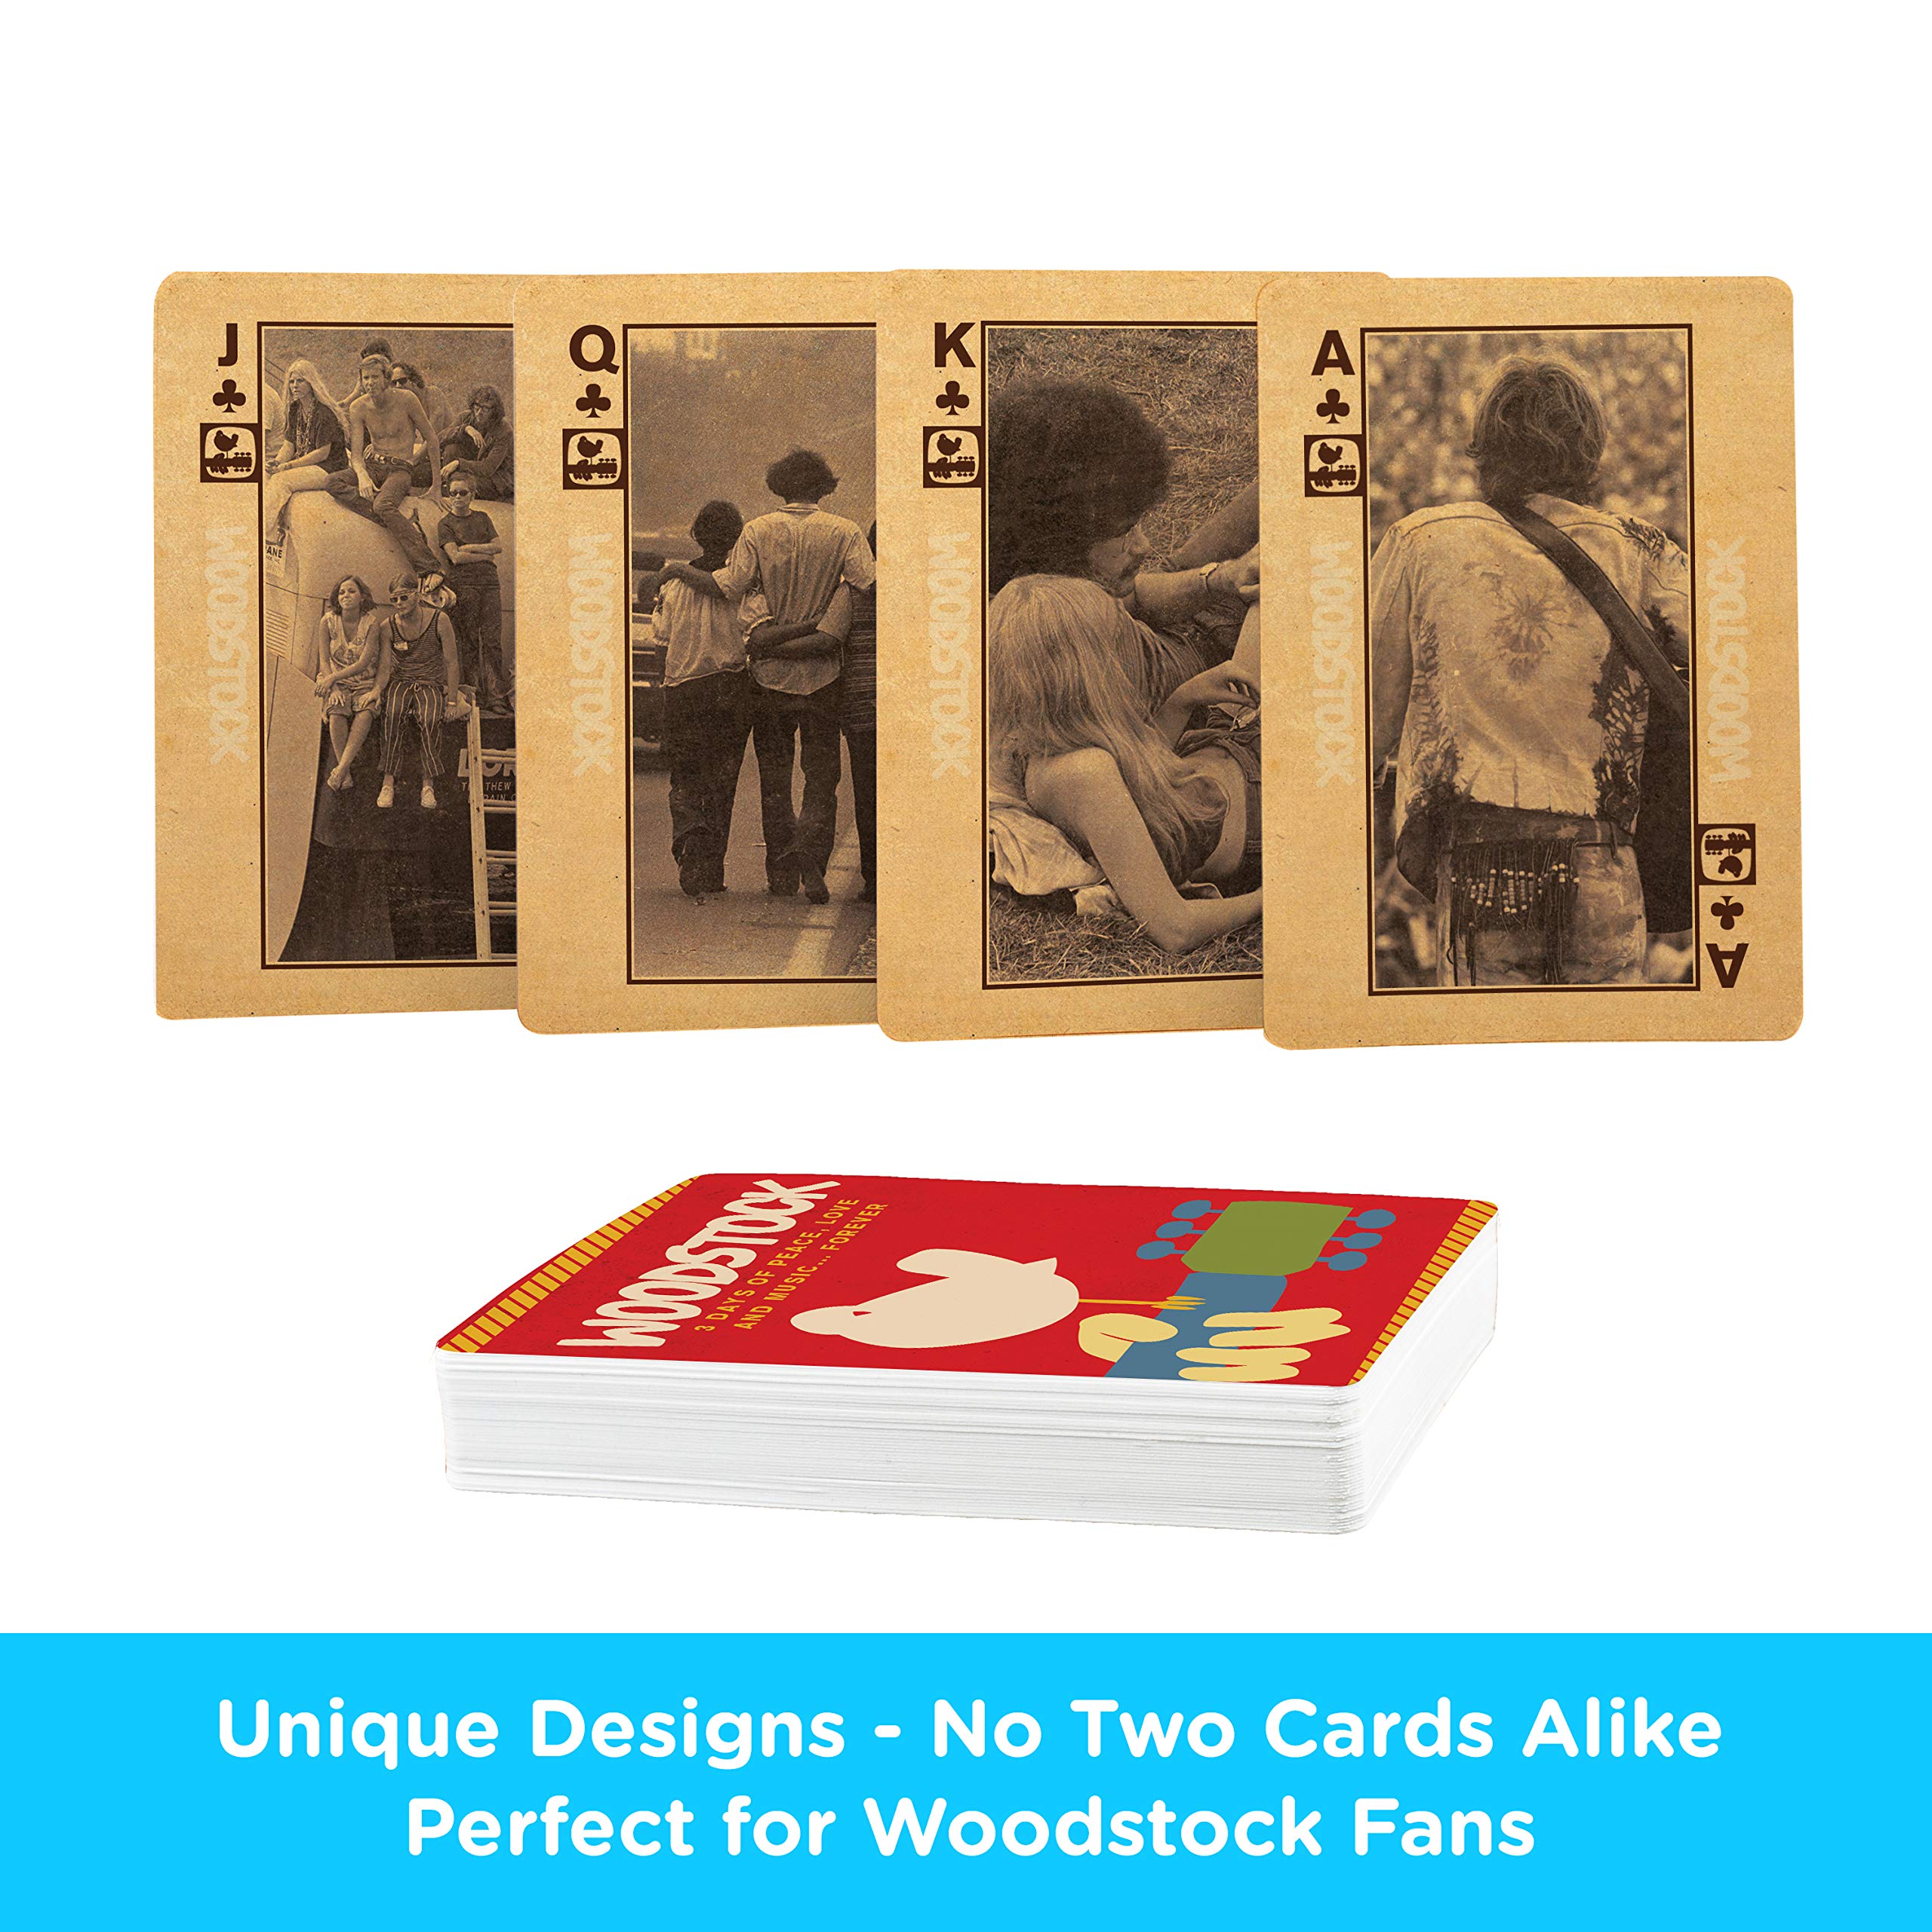 AQUARIUS Woodstock Playing Cards - Woodstock Themed Deck of Cards for Your Favorite Card Games - Officially Licensed Woodstock Merchandise & Collectible Gift